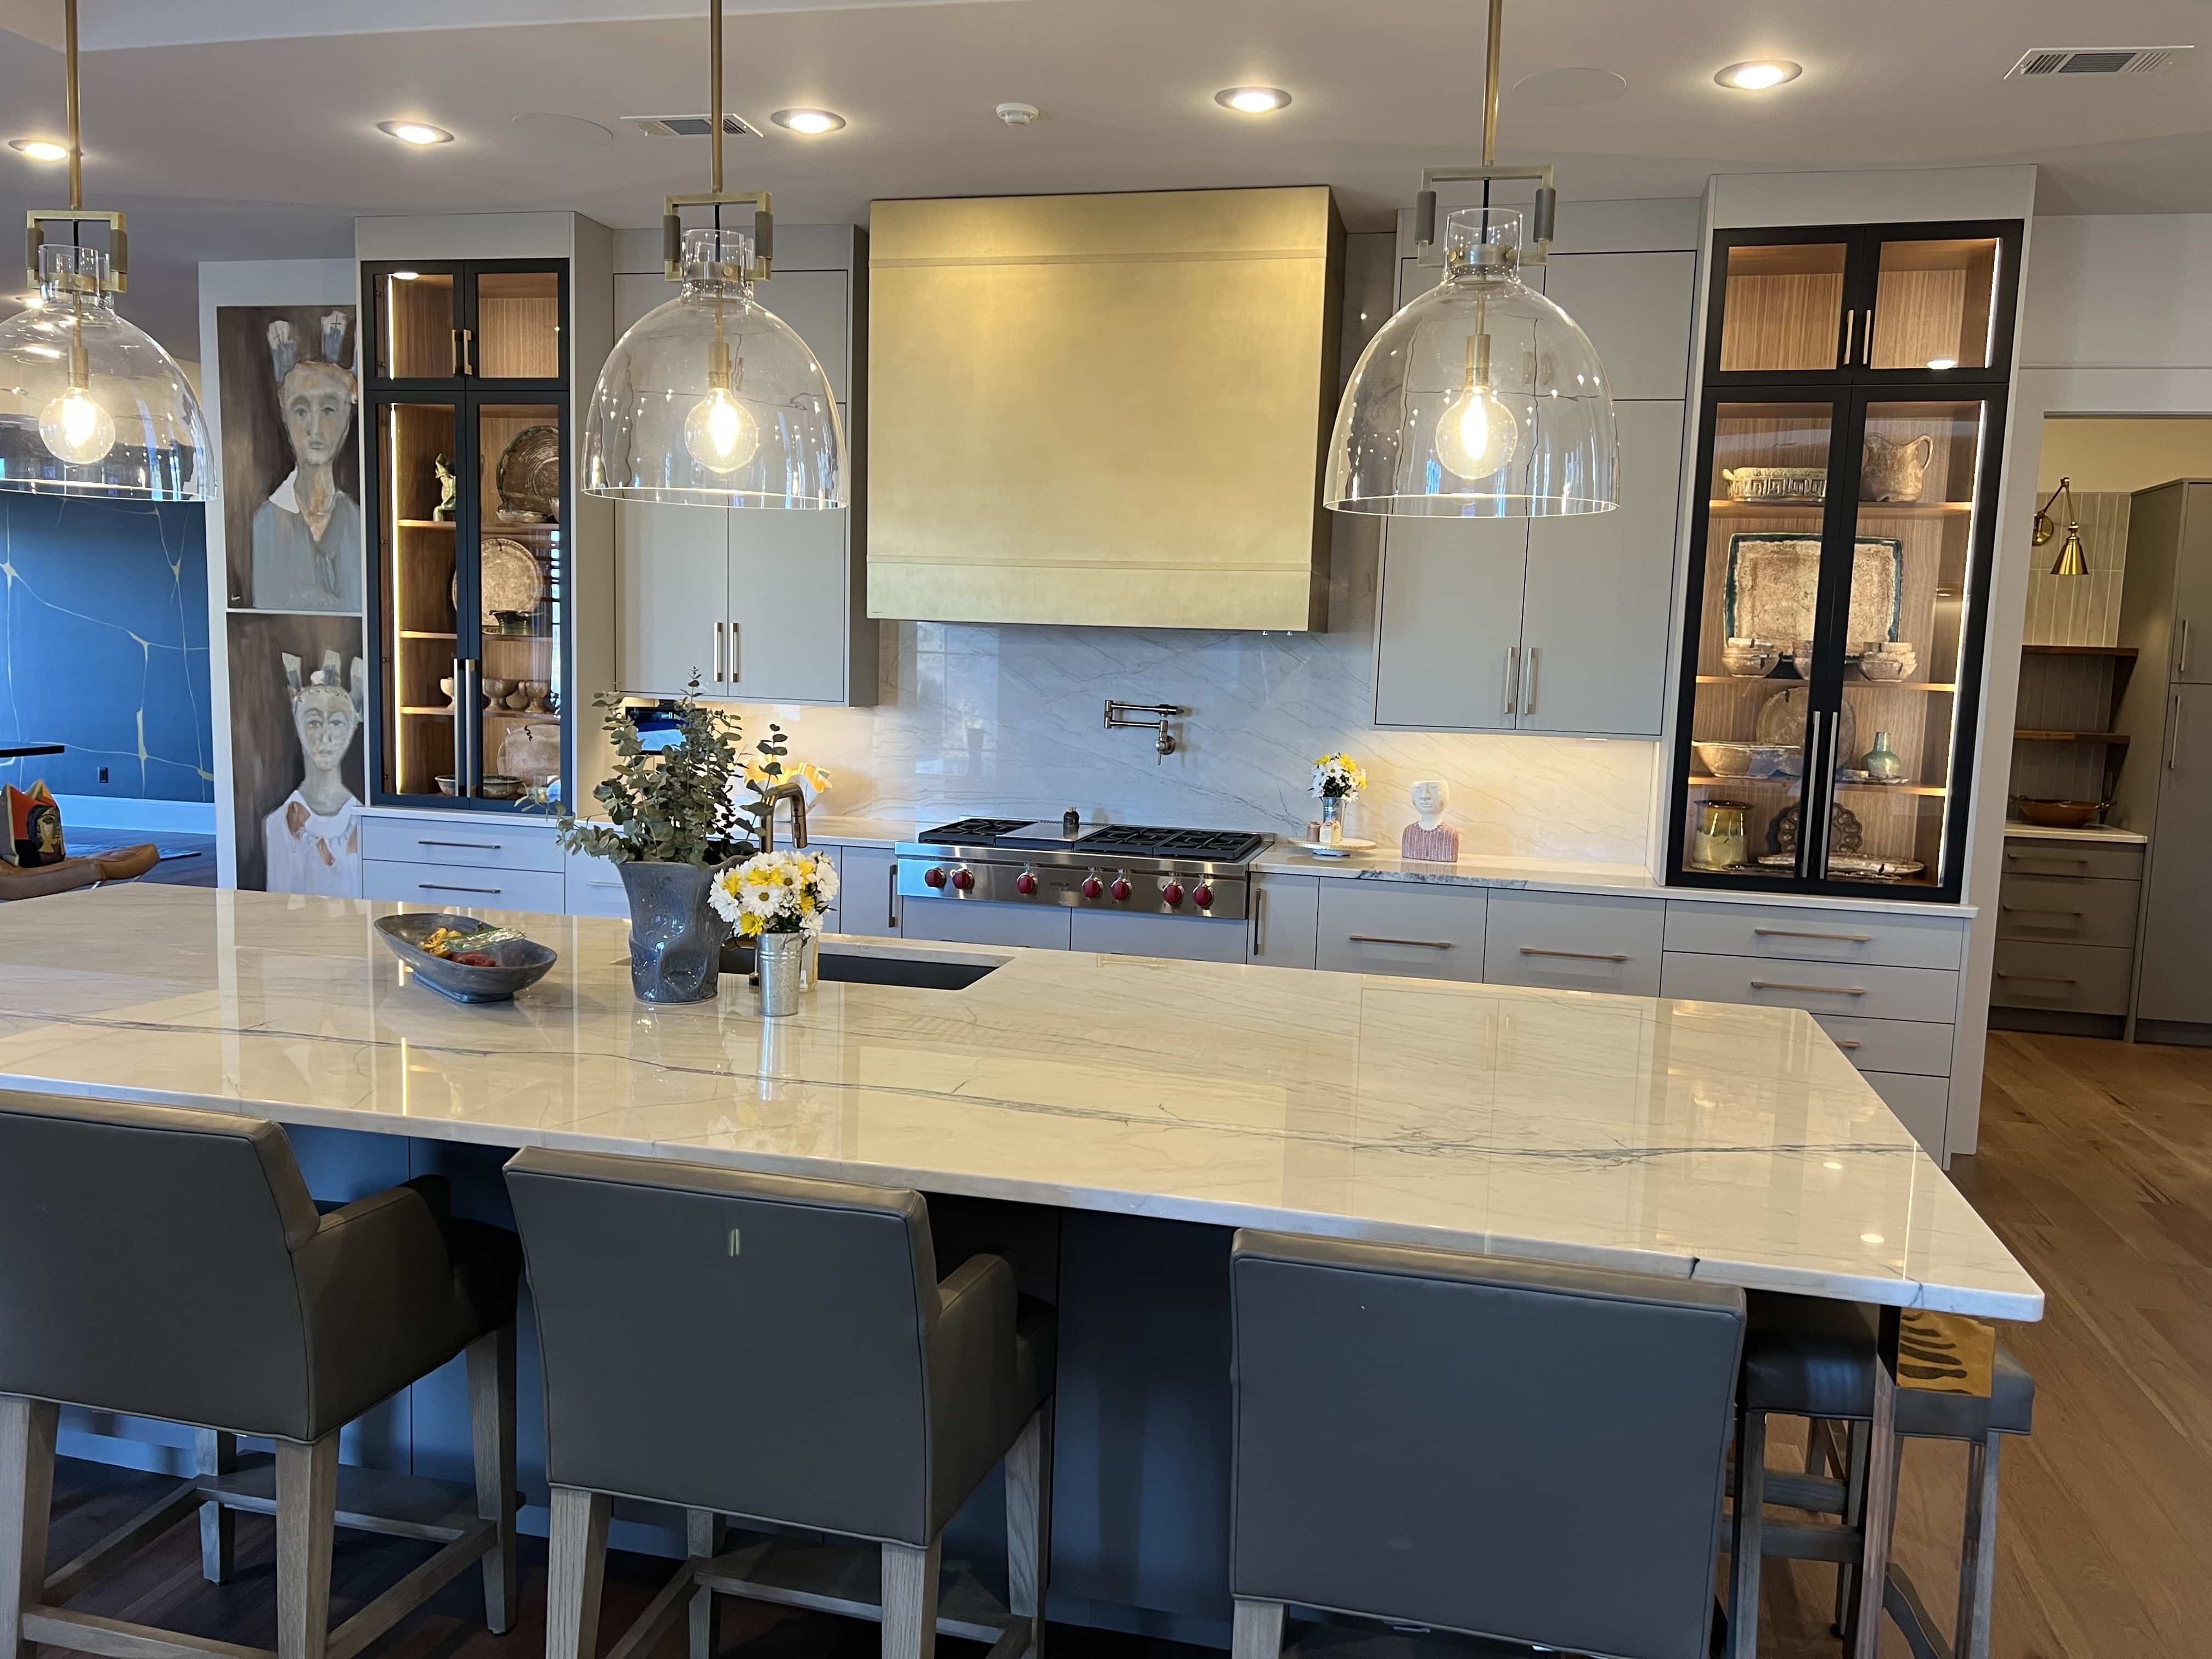 Charming range hood options, a timeless white kitchen cabinets paired with luxurious marble countertops, stunning white tile backsplash,